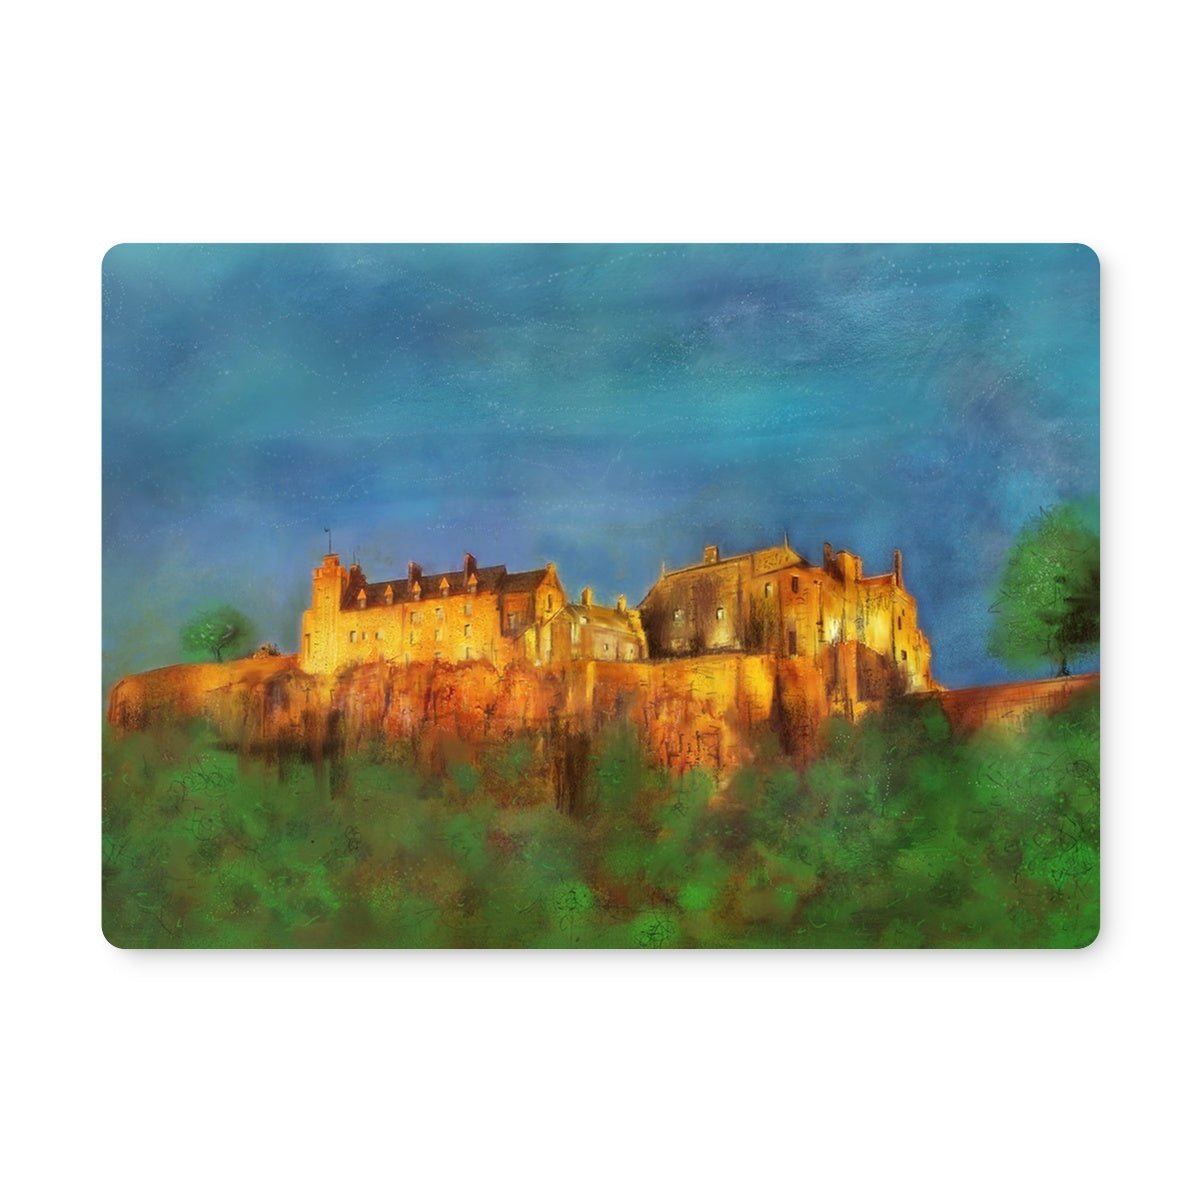 Stirling Castle Art Gifts Placemat-Placemats-Scottish Castles Art Gallery-6 Placemats-Paintings, Prints, Homeware, Art Gifts From Scotland By Scottish Artist Kevin Hunter